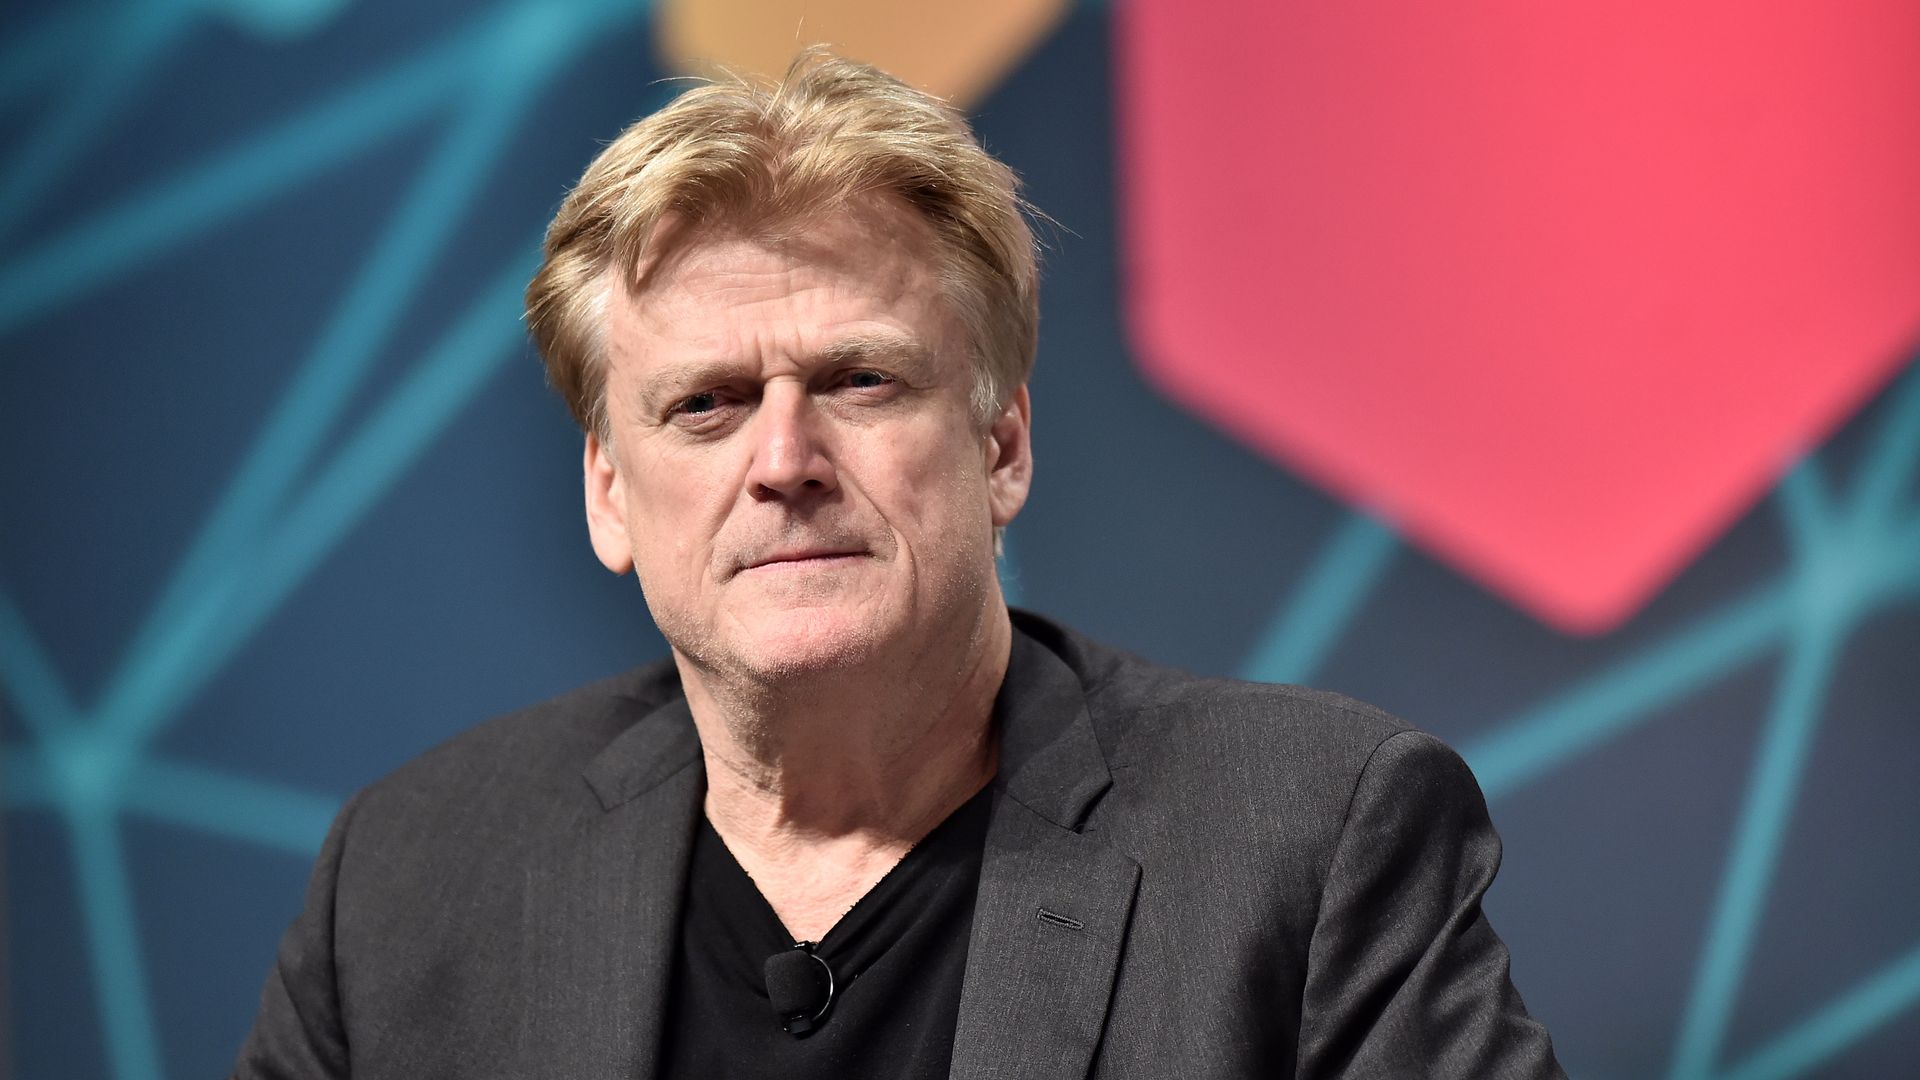 Founder and CEO of Overstock.com Patrick Byrne attends Consensus 2019 at the Hilton Midtown on May 15, 2019 in New York City